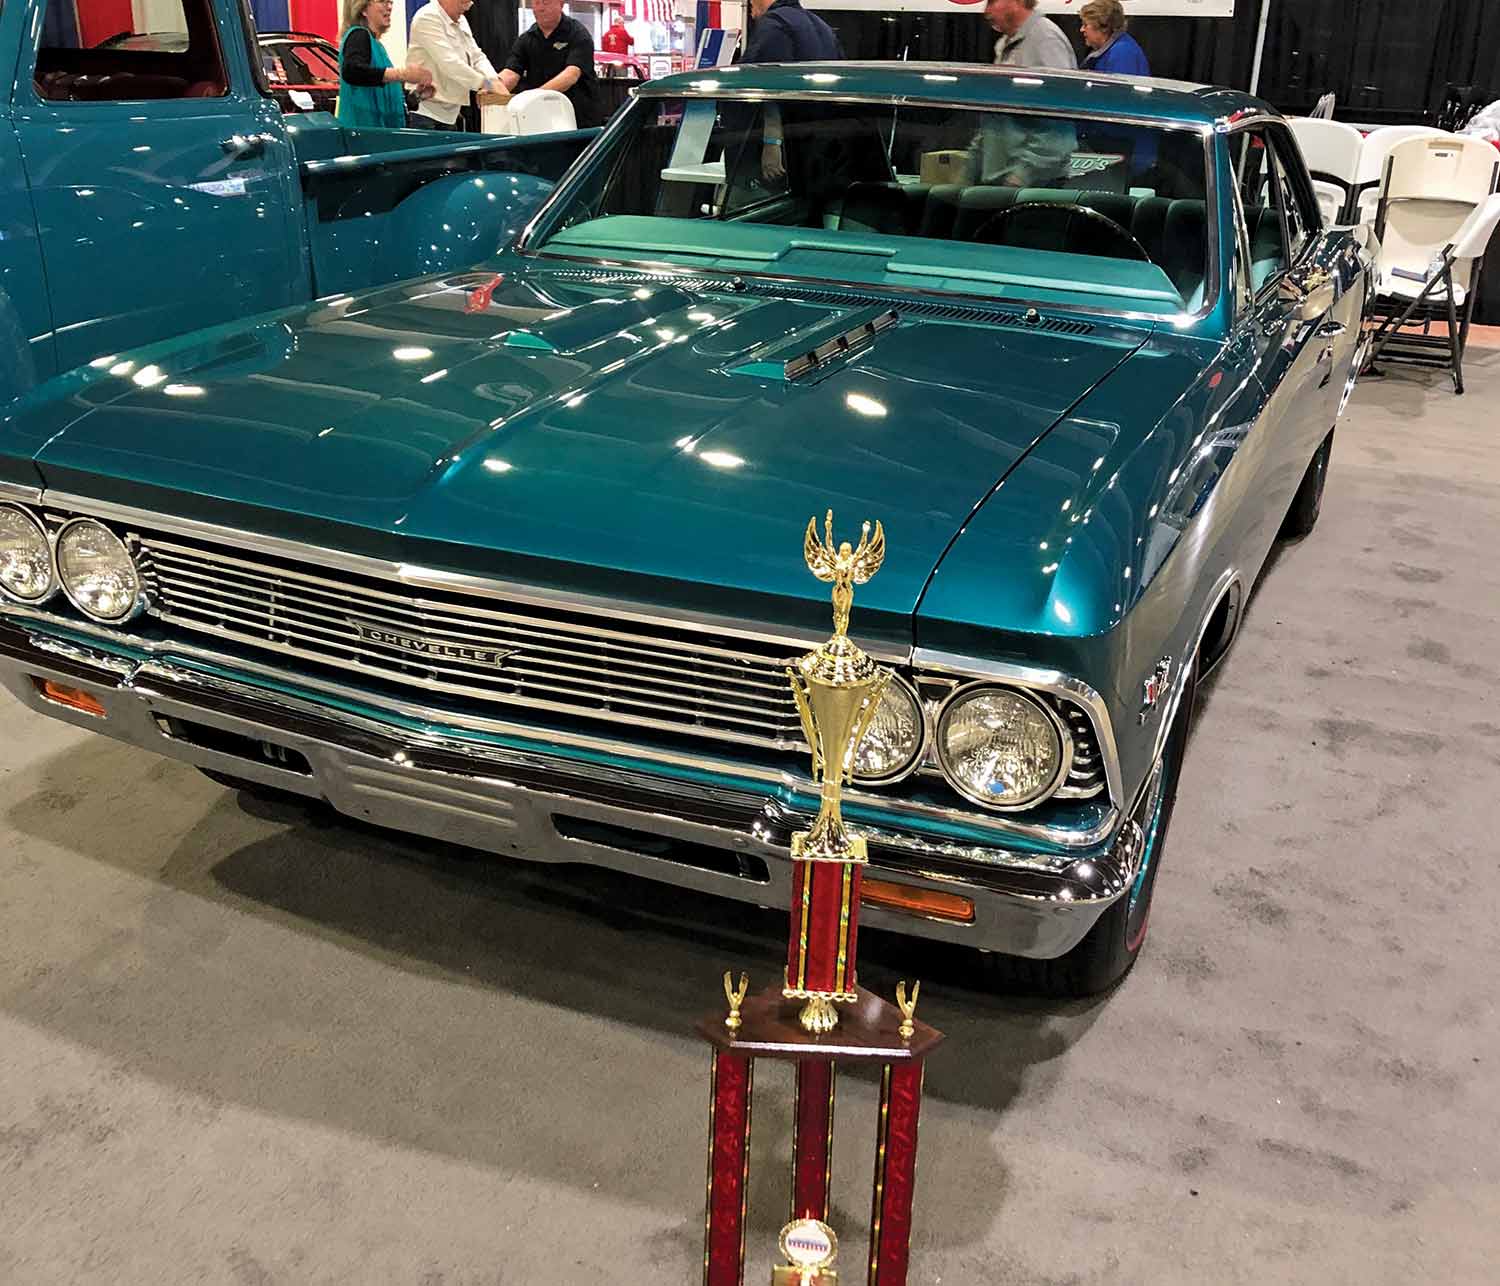 the front of the ’66 Chevelle with the first place trophy placed near it